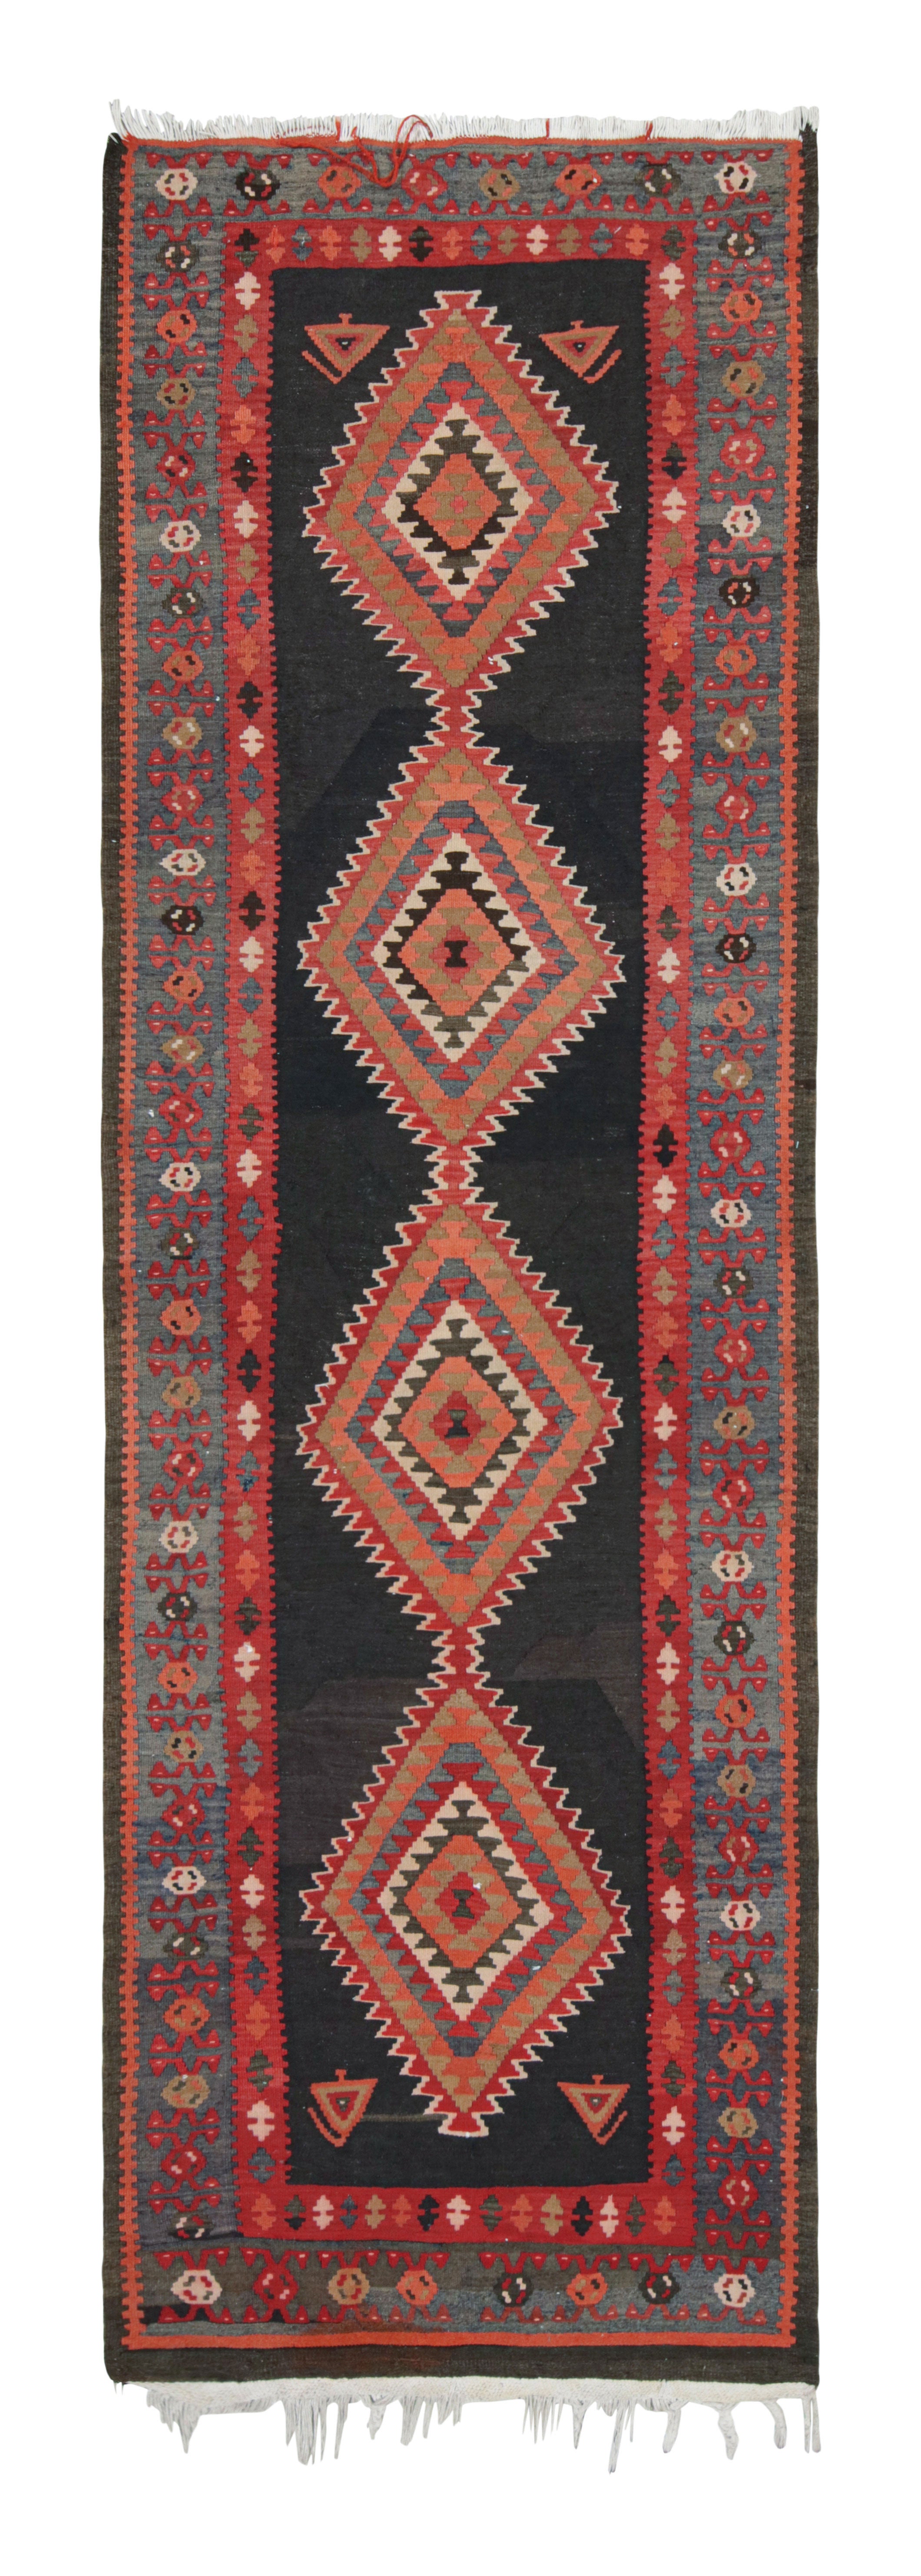 1920s Antique Persian Kilim in Black, Red and Blue Tribal pattern by Rug & Kilim For Sale